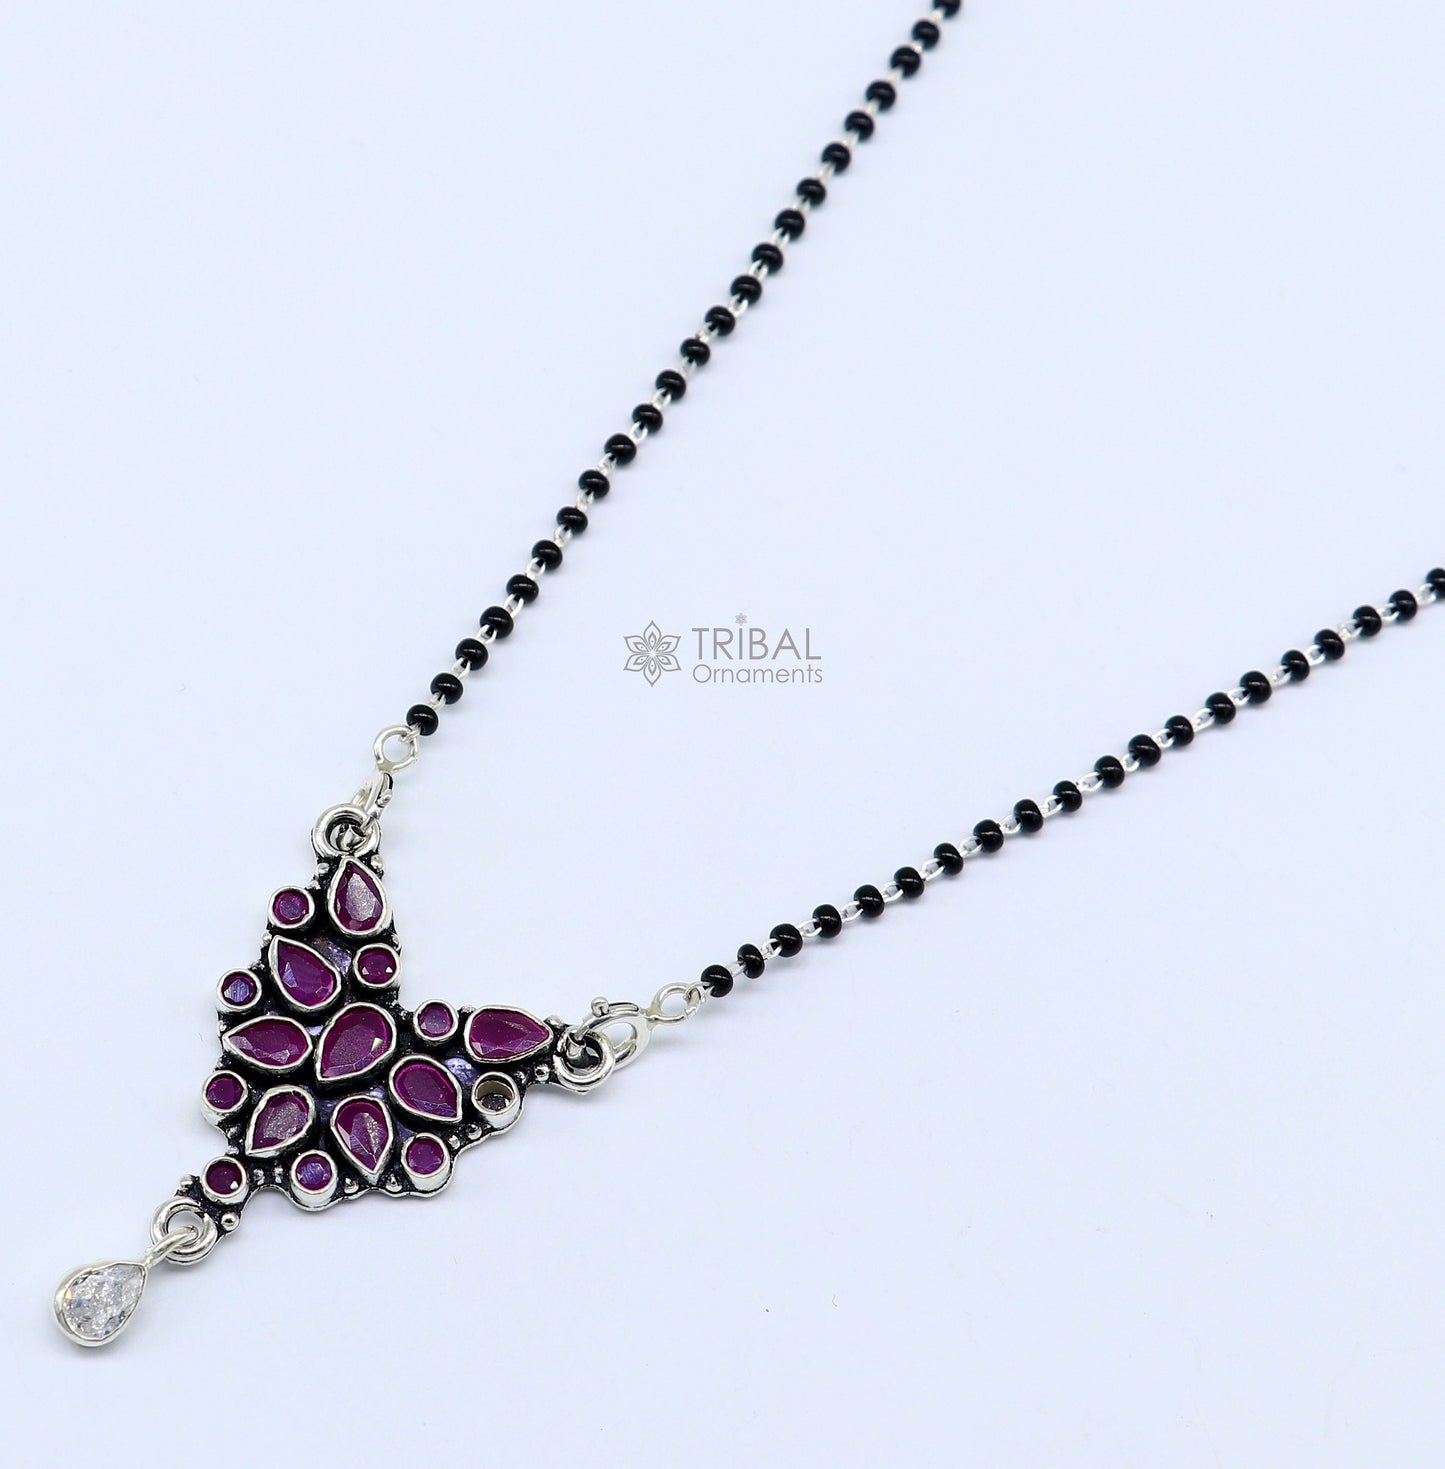 925 sterling silver handmade delicate black beaded chain and fabulous cut stone pendant, amazing brides mangalsutra necklace from india ms46 - TRIBAL ORNAMENTS